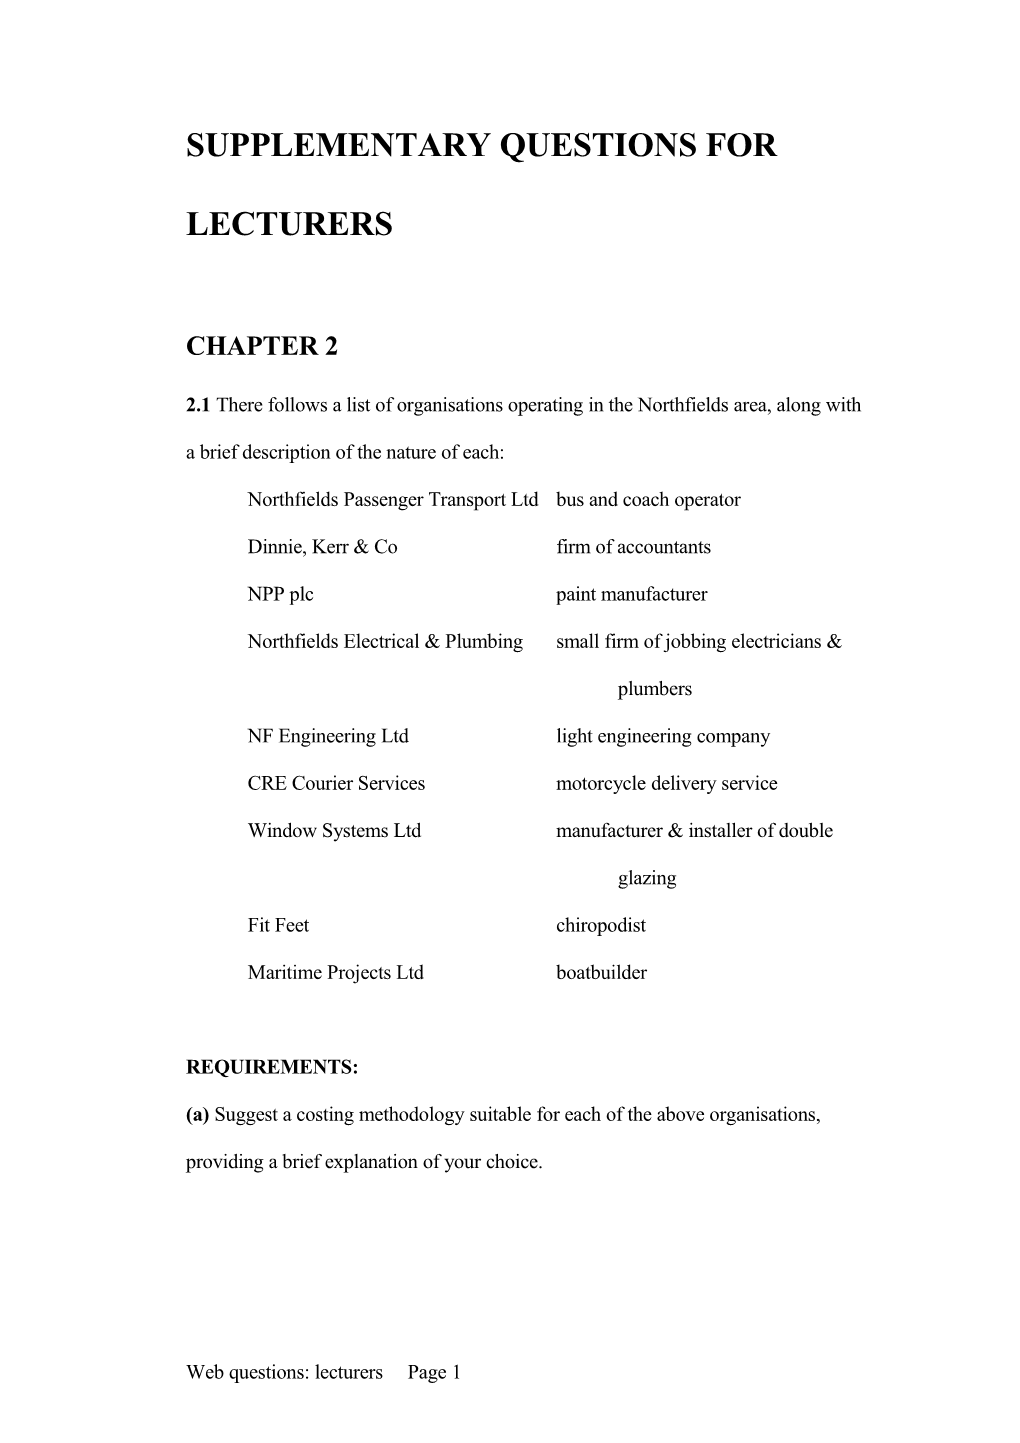 Supplementary Questions for Lecturers